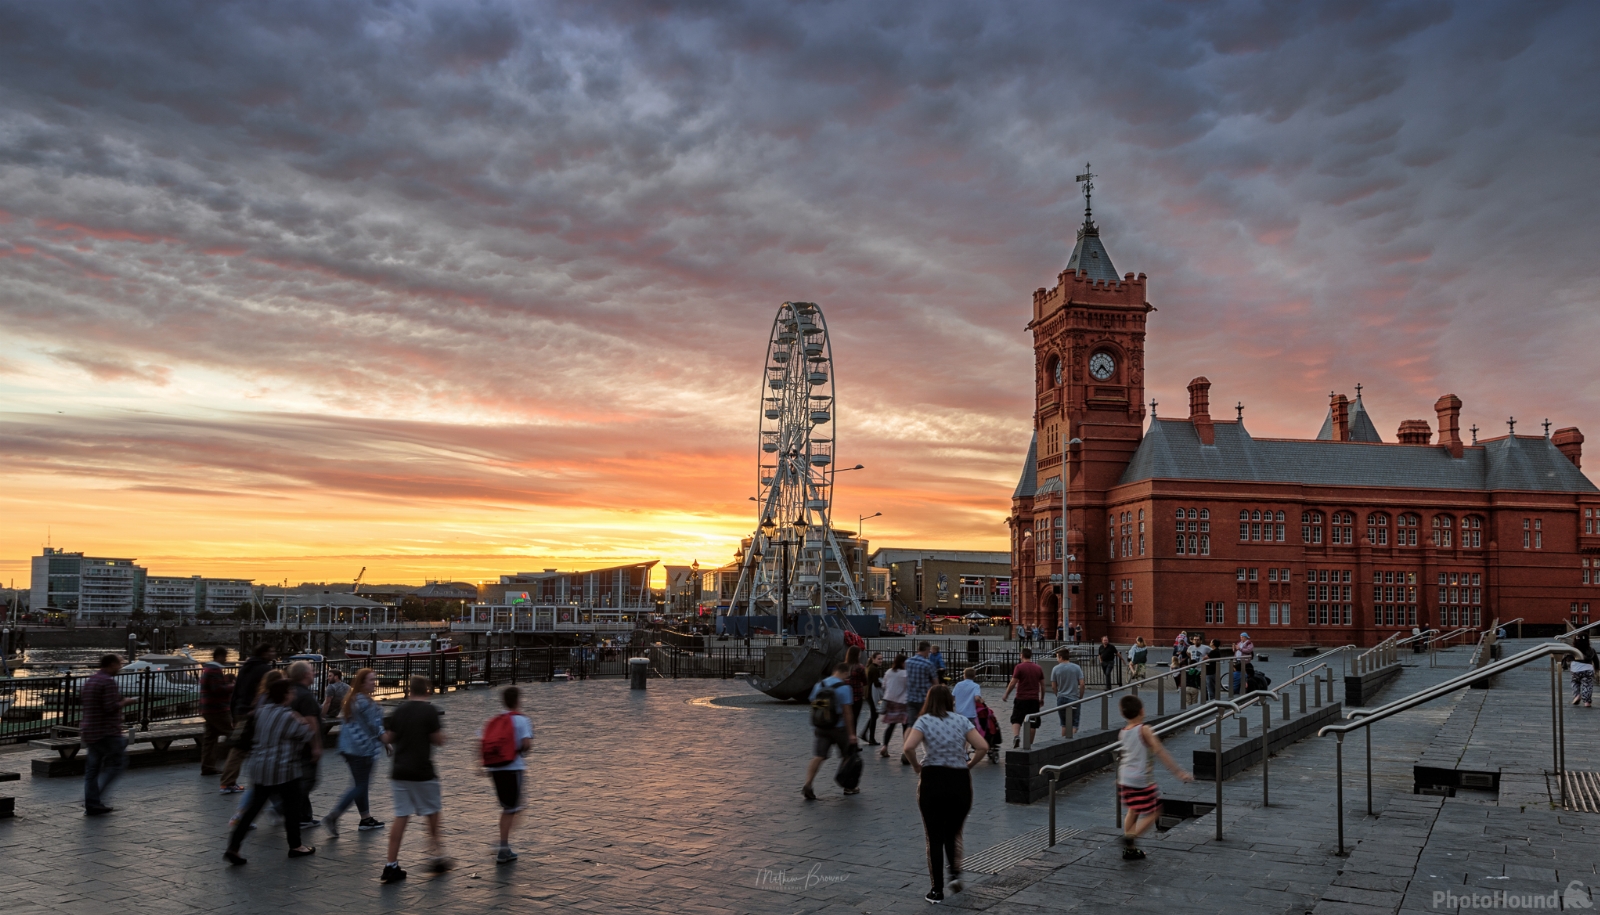 Image of Pierhead Building by Mathew Browne